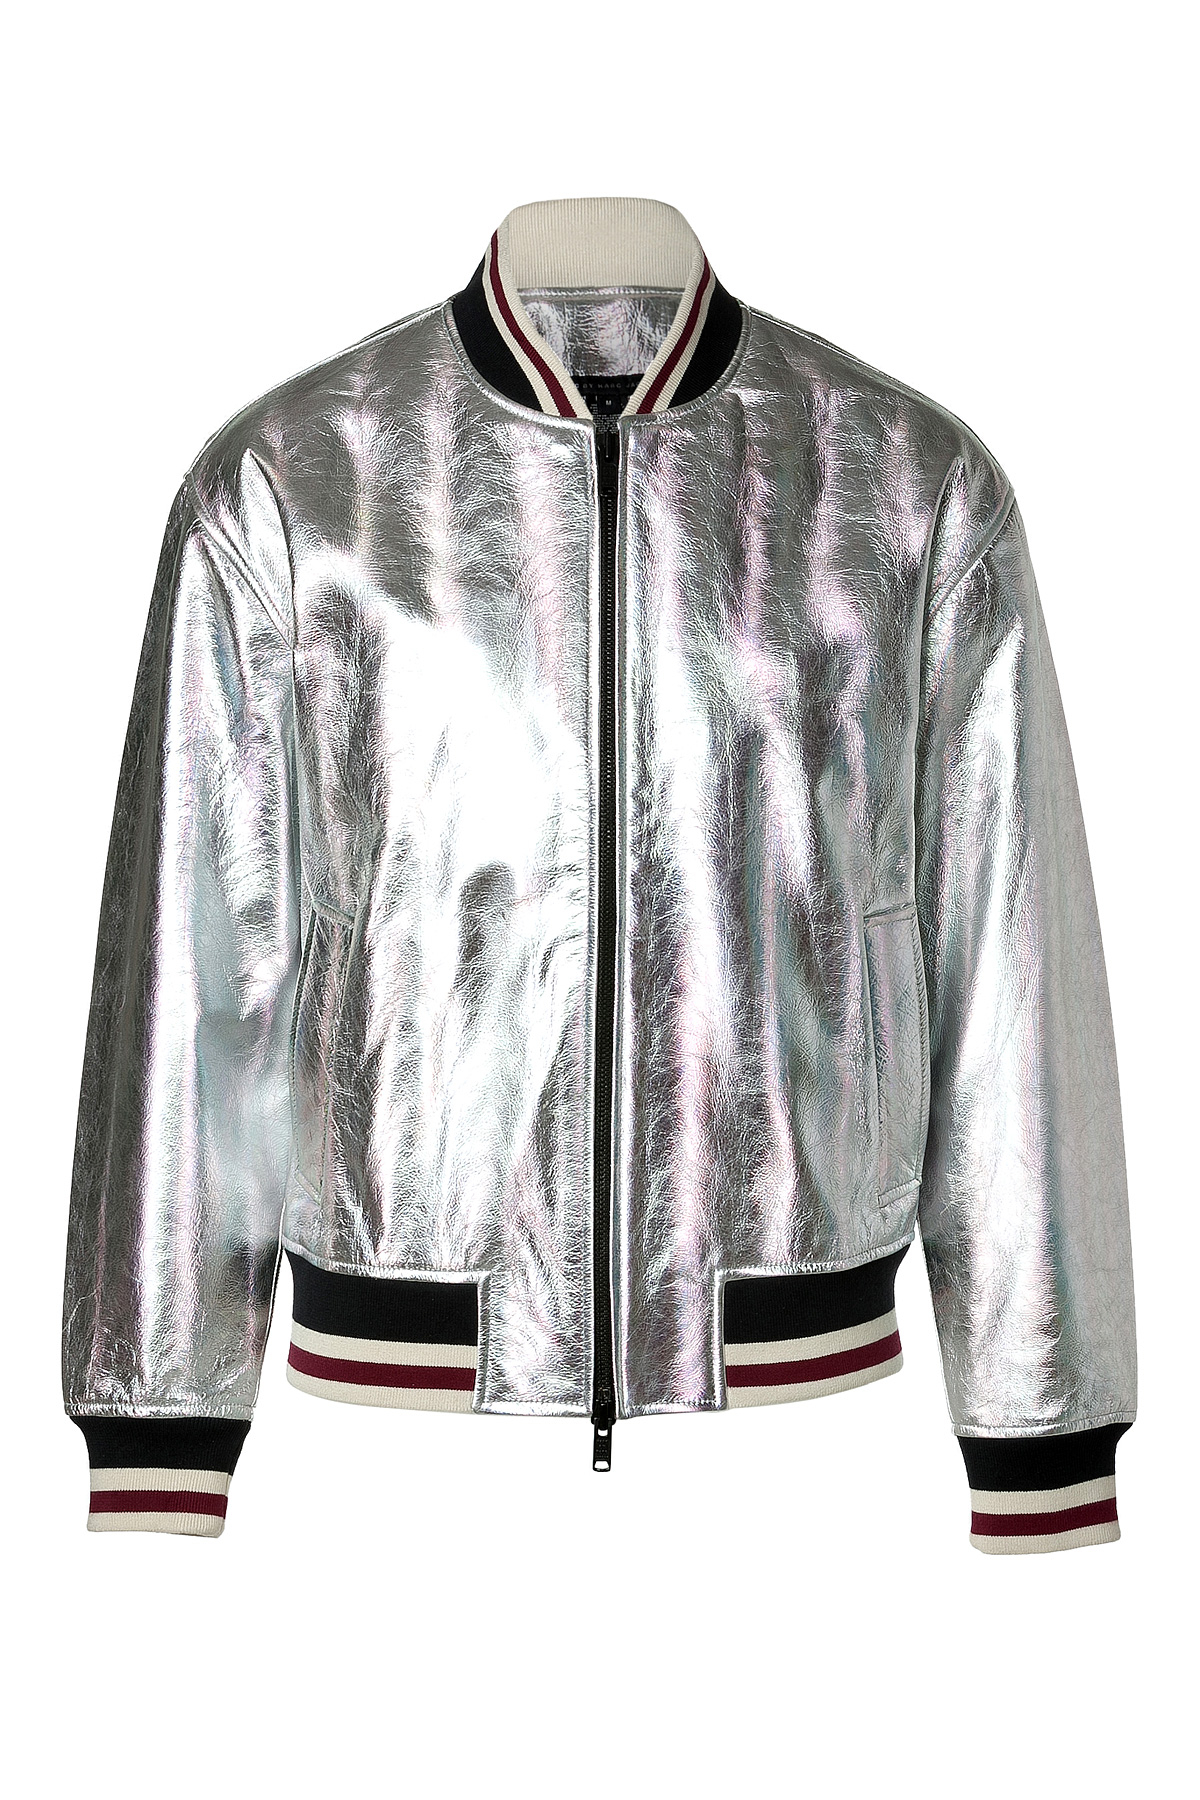 Lyst - Marc By Marc Jacobs Metallic Leather Bomber Jacket in Metallic